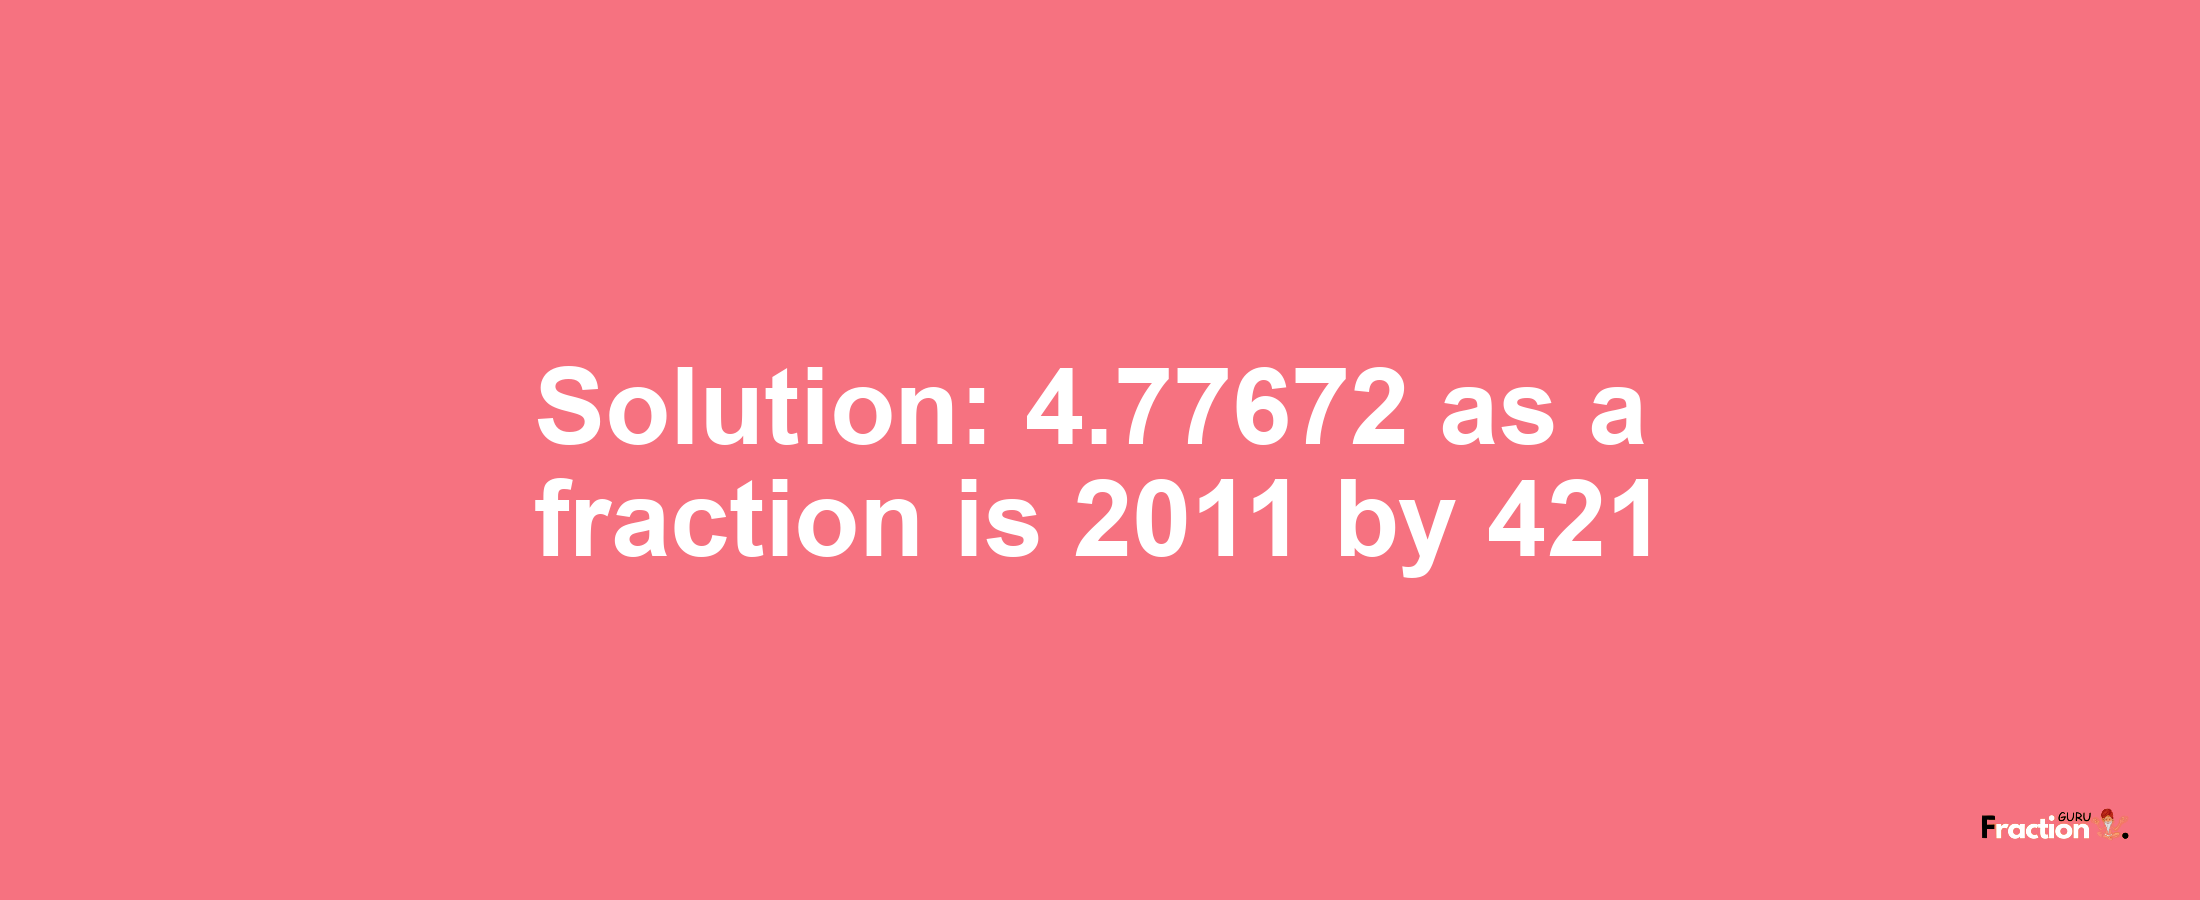 Solution:4.77672 as a fraction is 2011/421